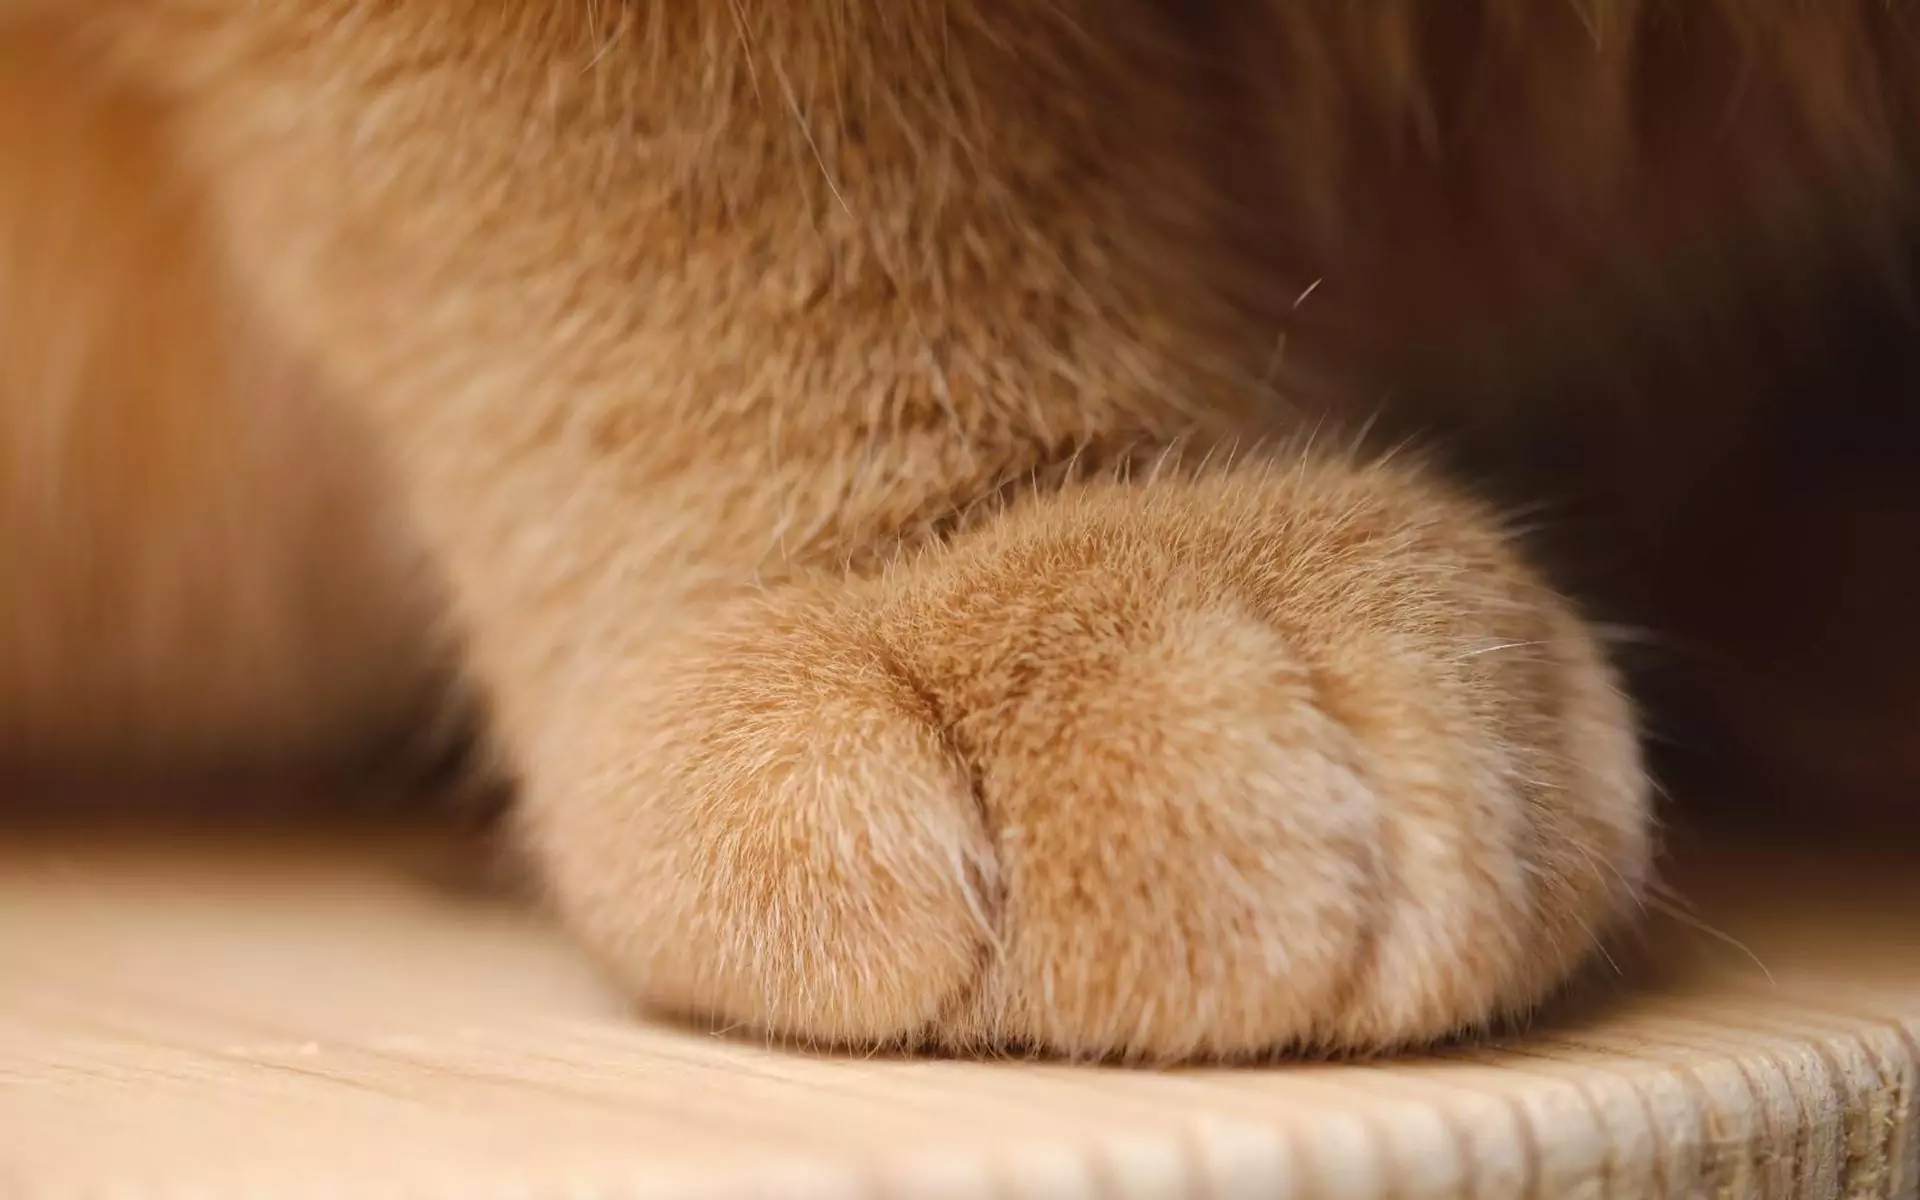 How many toes does a cat have?